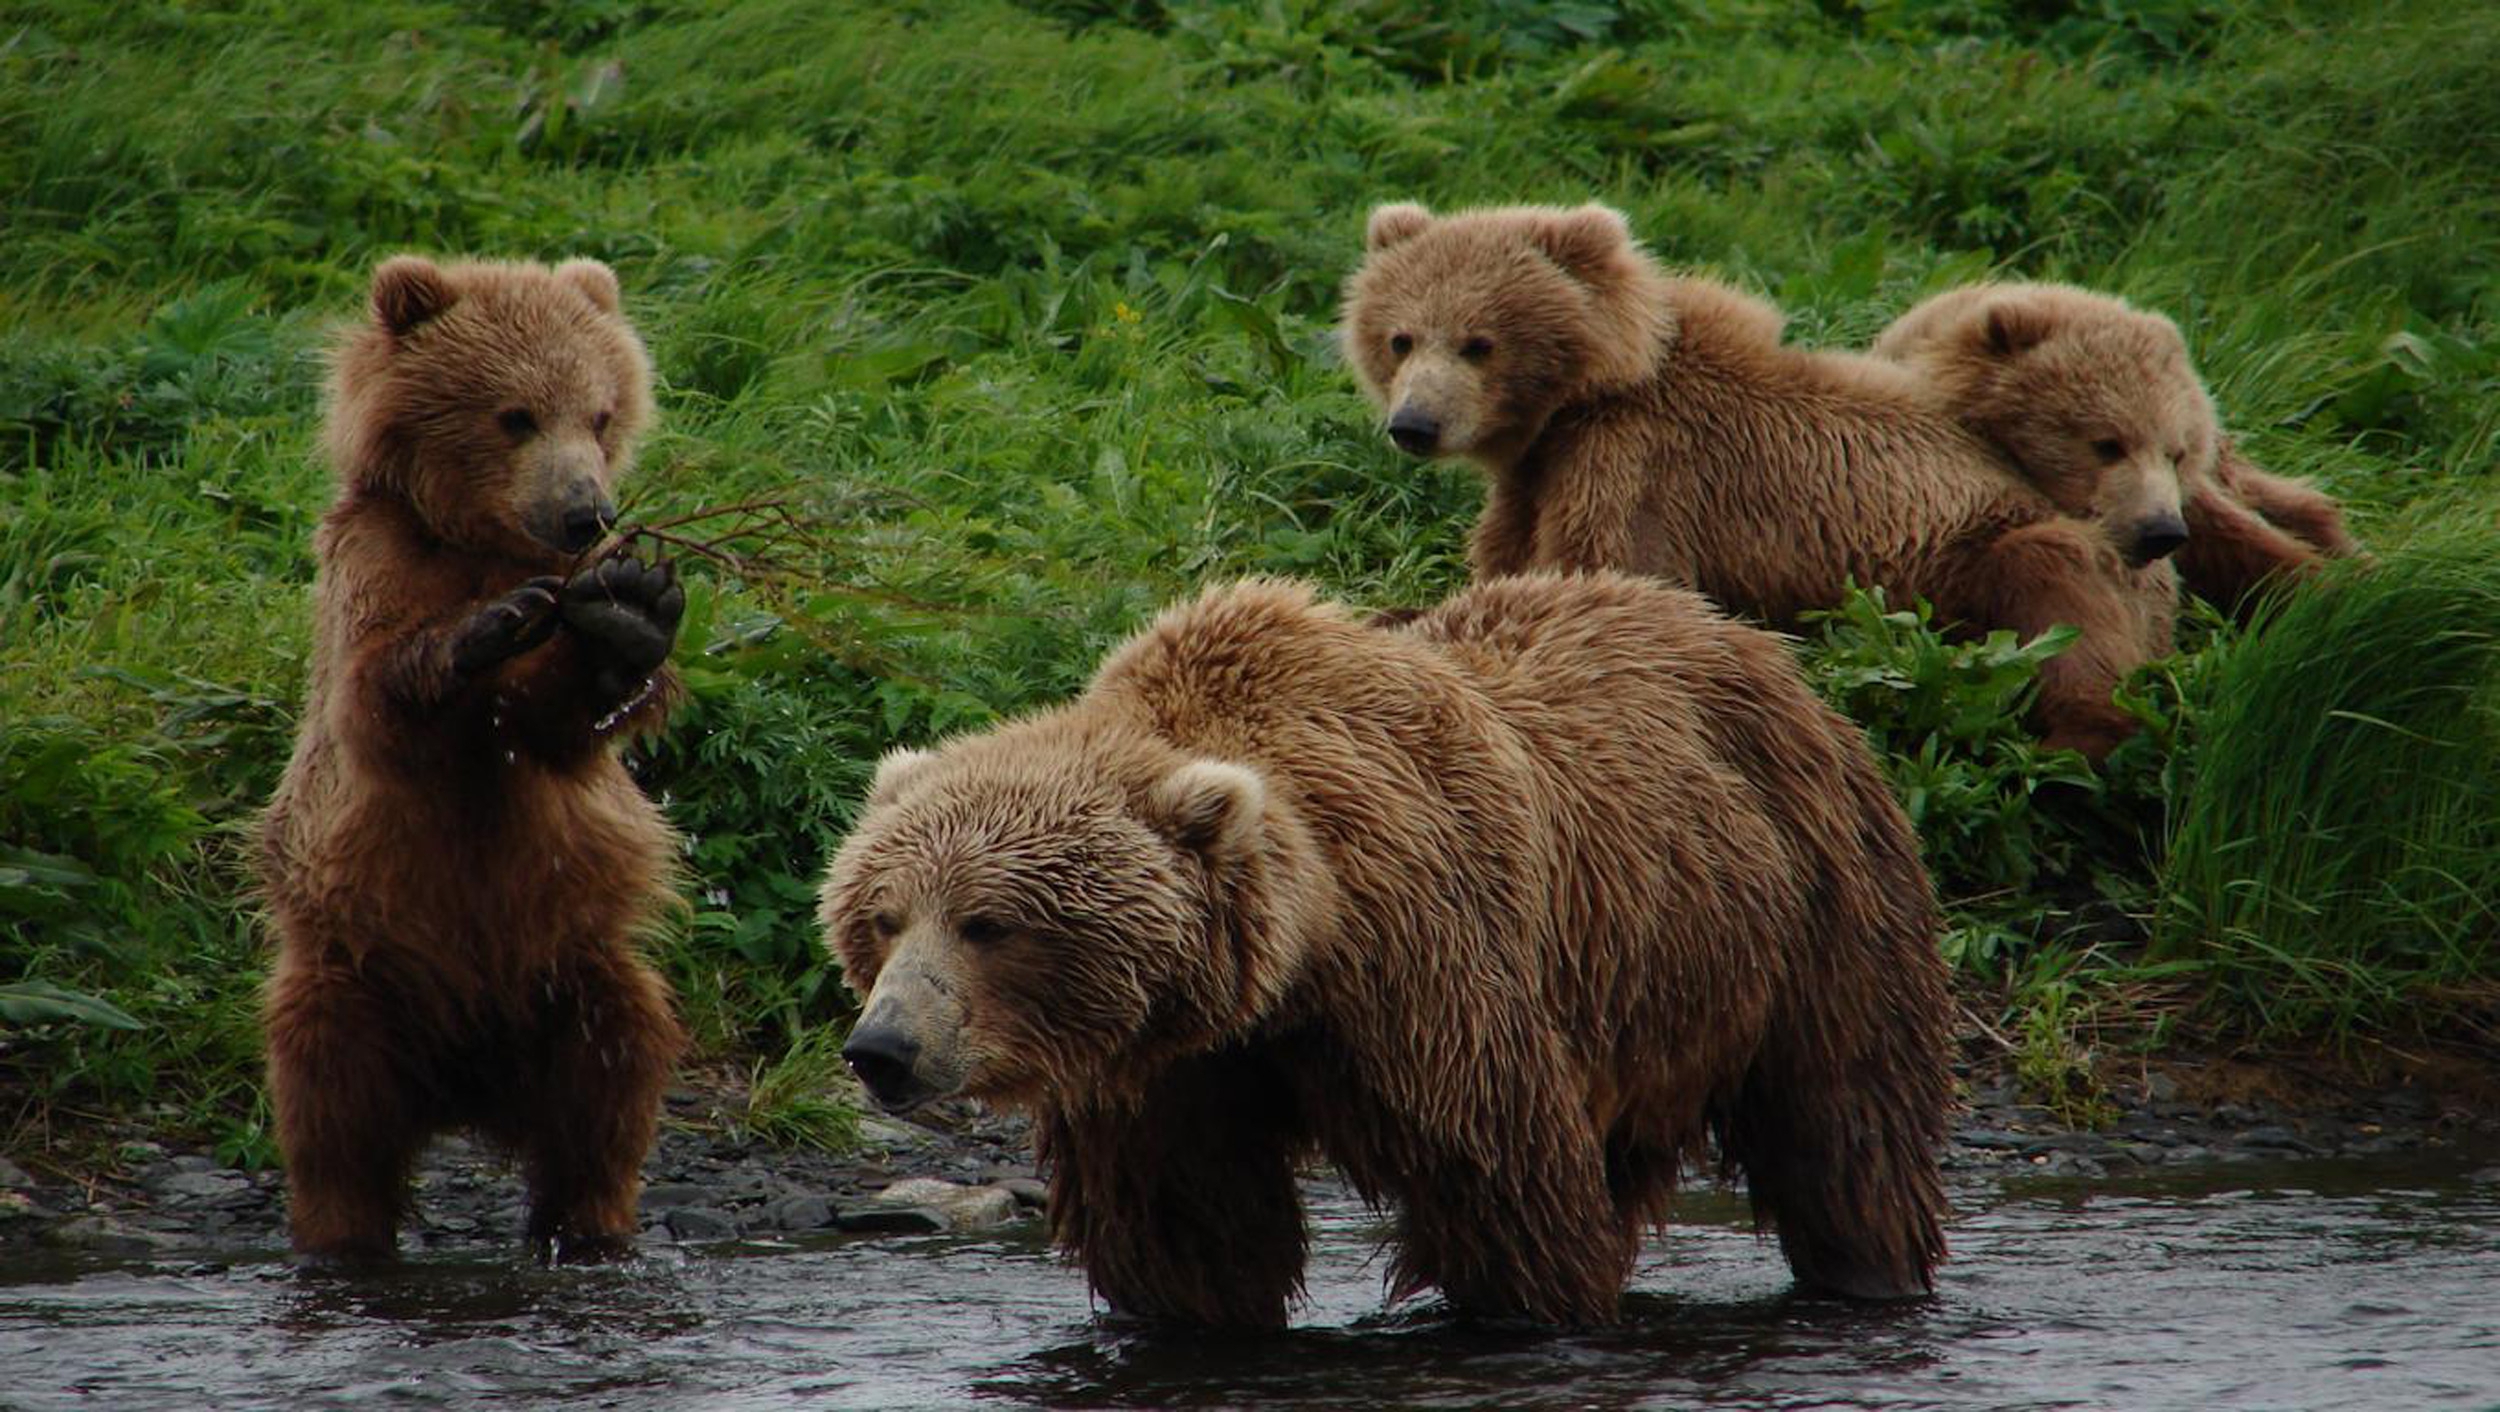 Grizzly Bear Wallpaper Image Photos Pictures Background